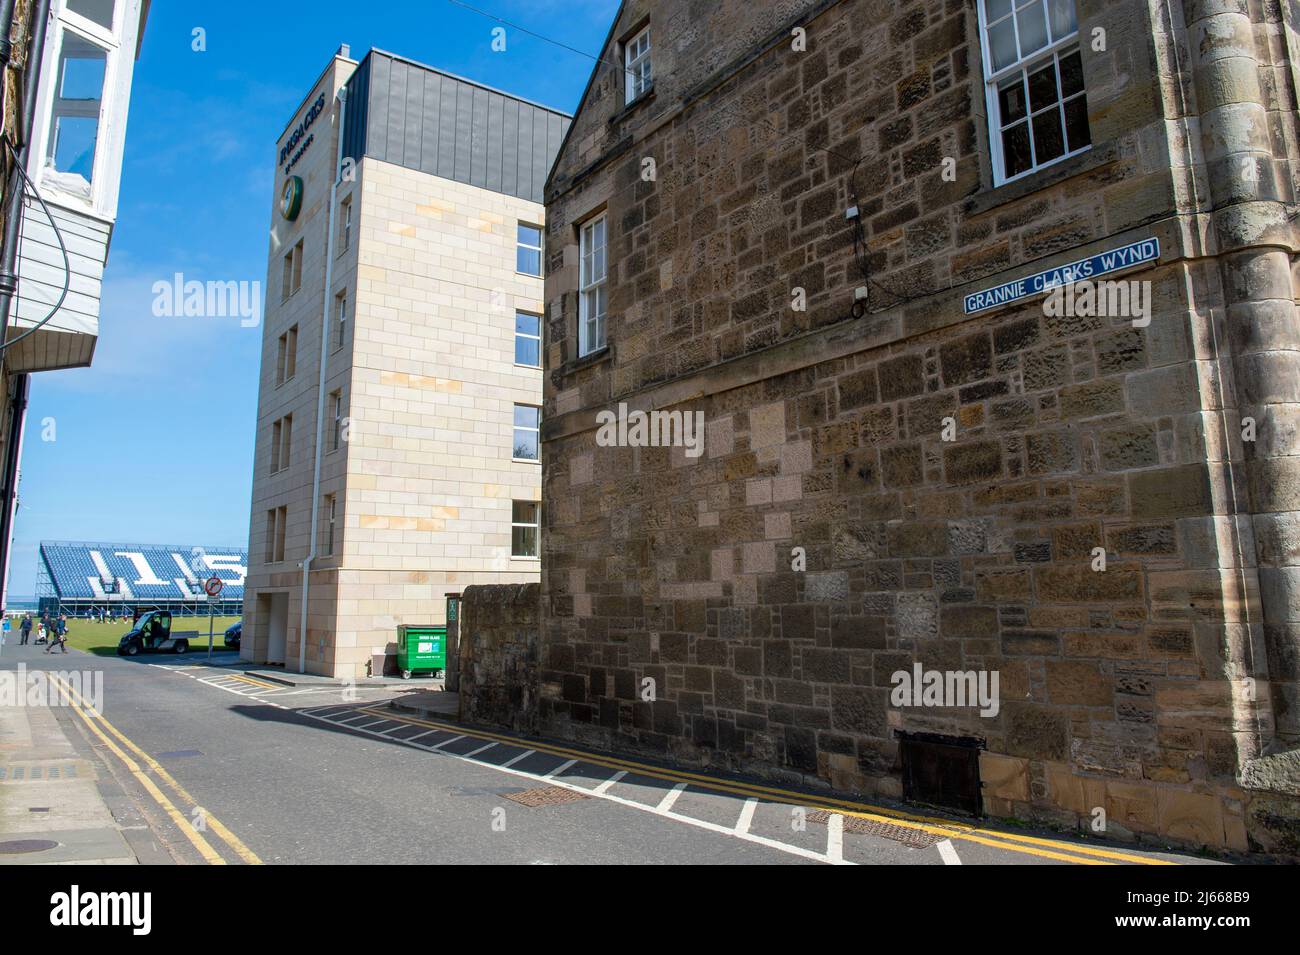 Grannie Clarks Wynd, St Andrews. The street crosses the 18th and 1st fairways of the Old Course which allows access to the West Sands beach. Stock Photo